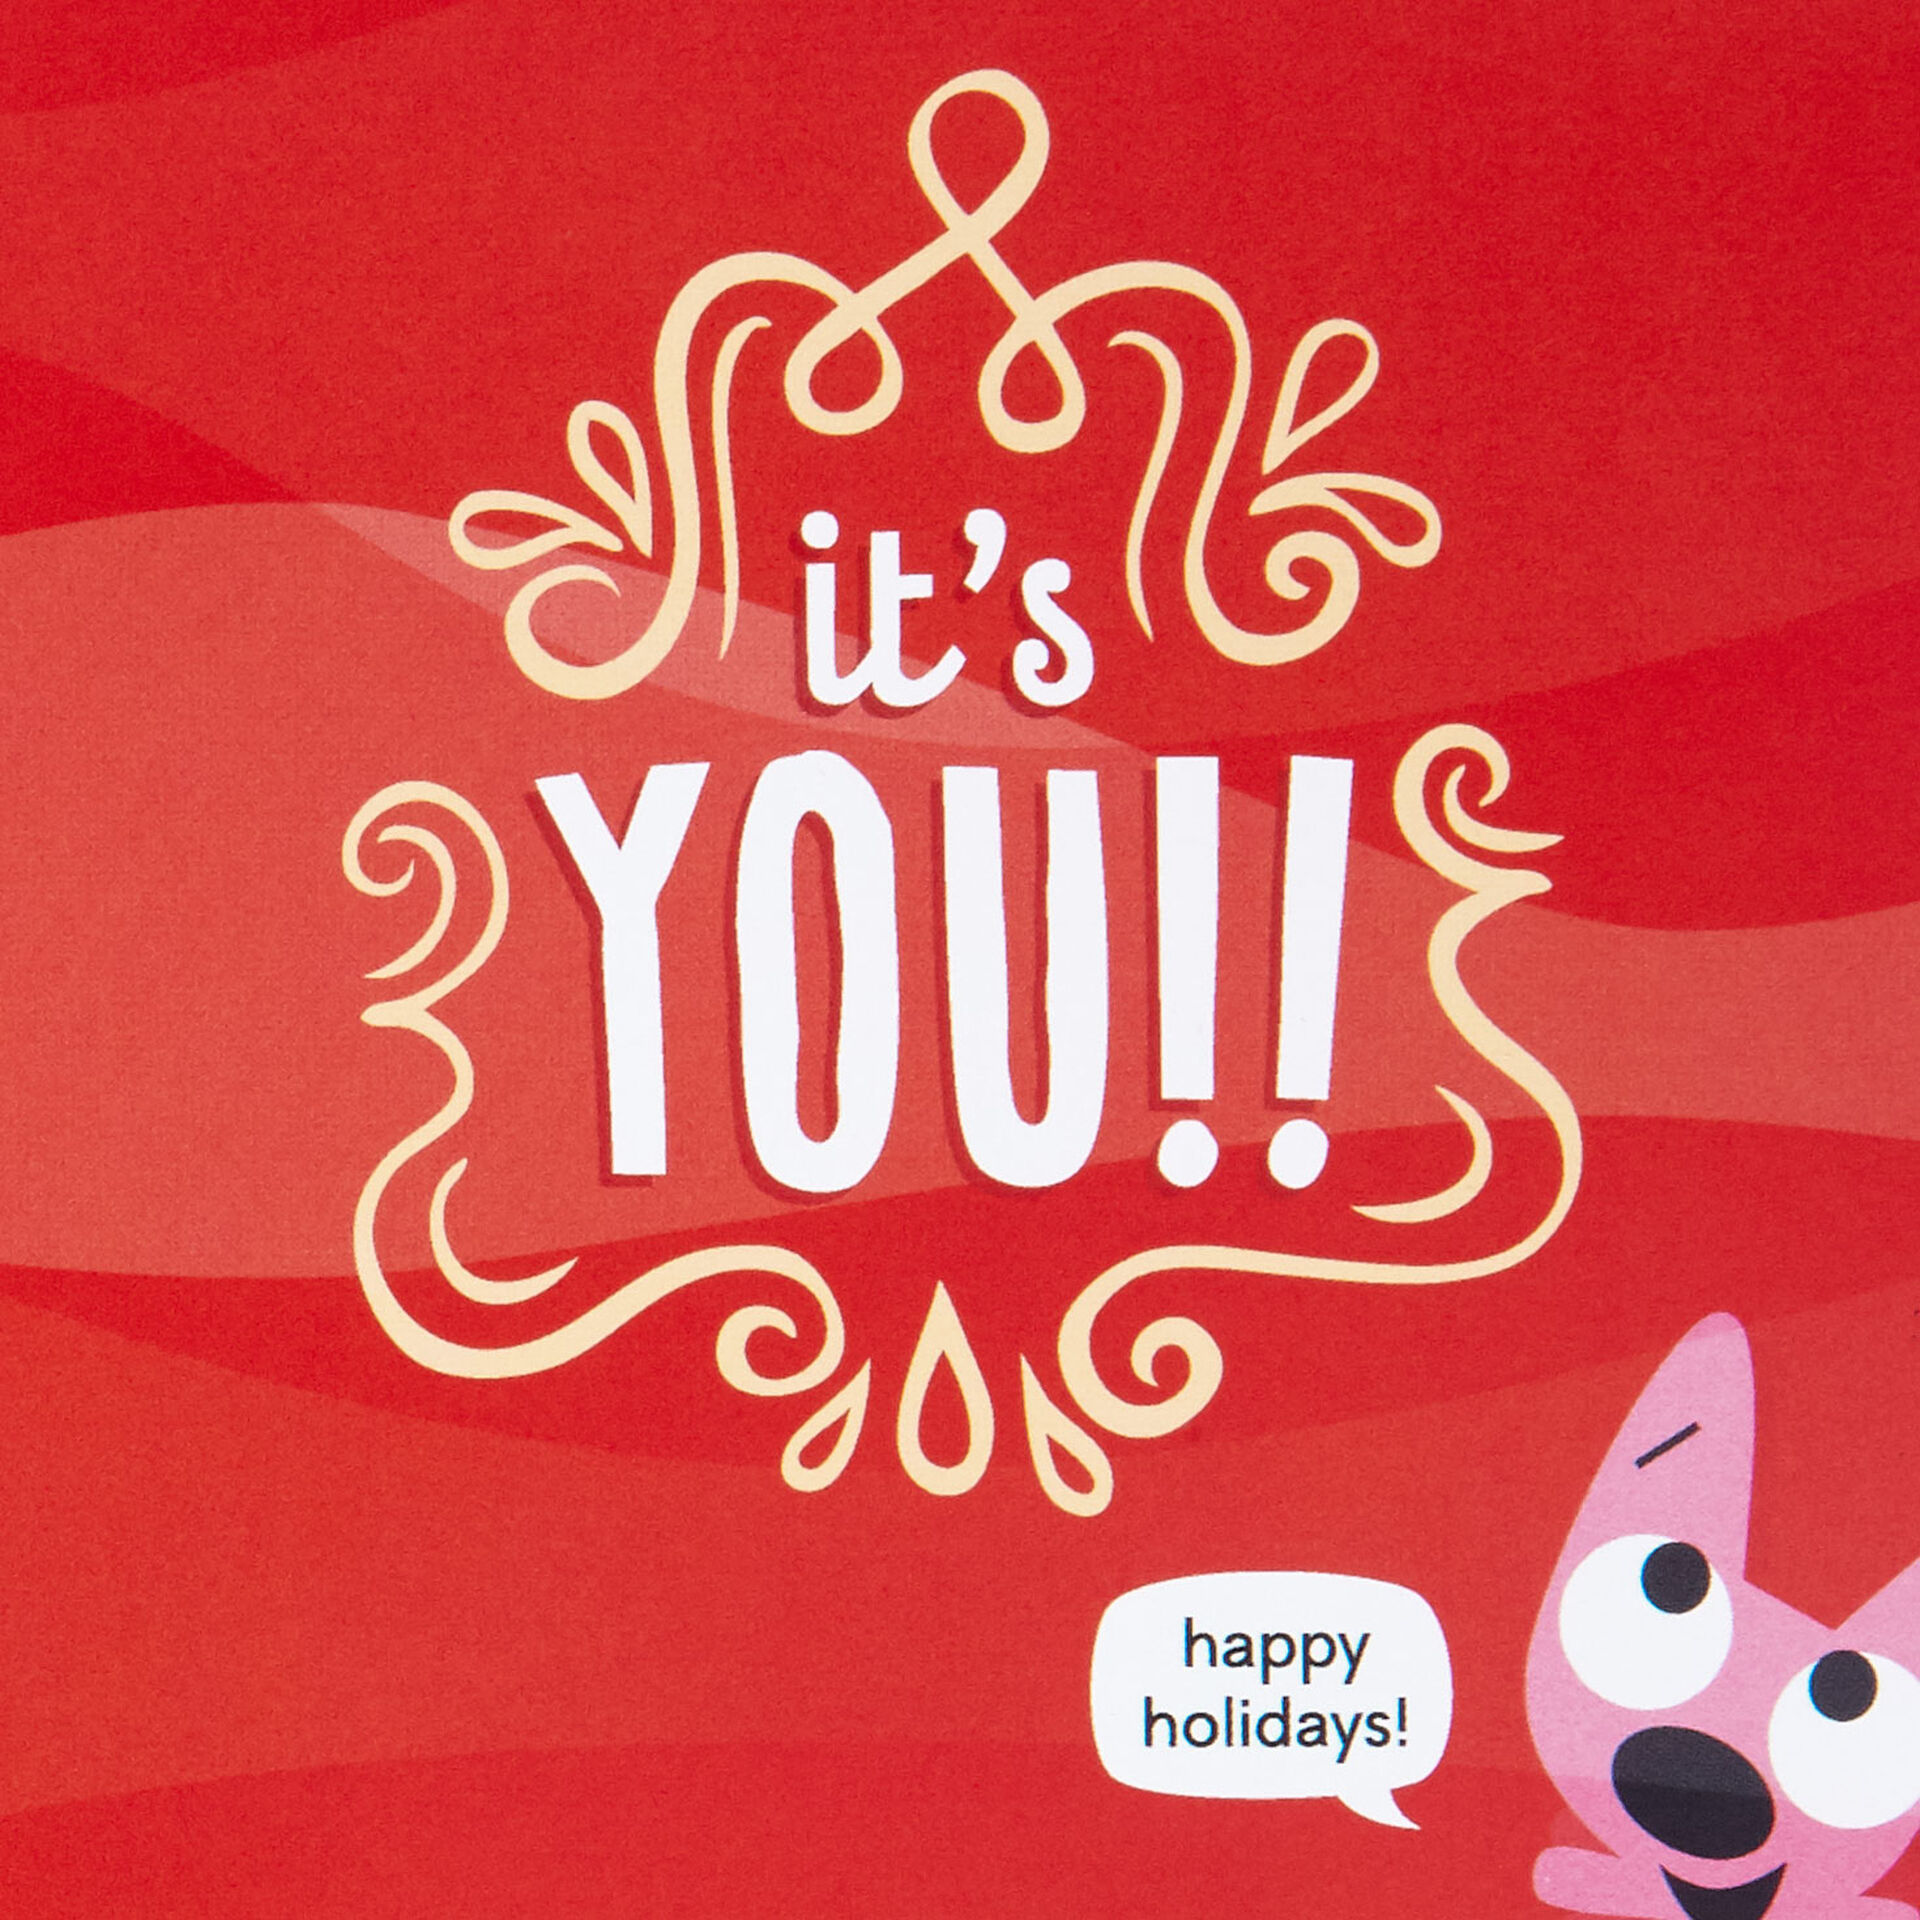 Hoopsandyoyo™ Fun To Think About Musical Christmas Card Greeting Cards Hallmark 8419